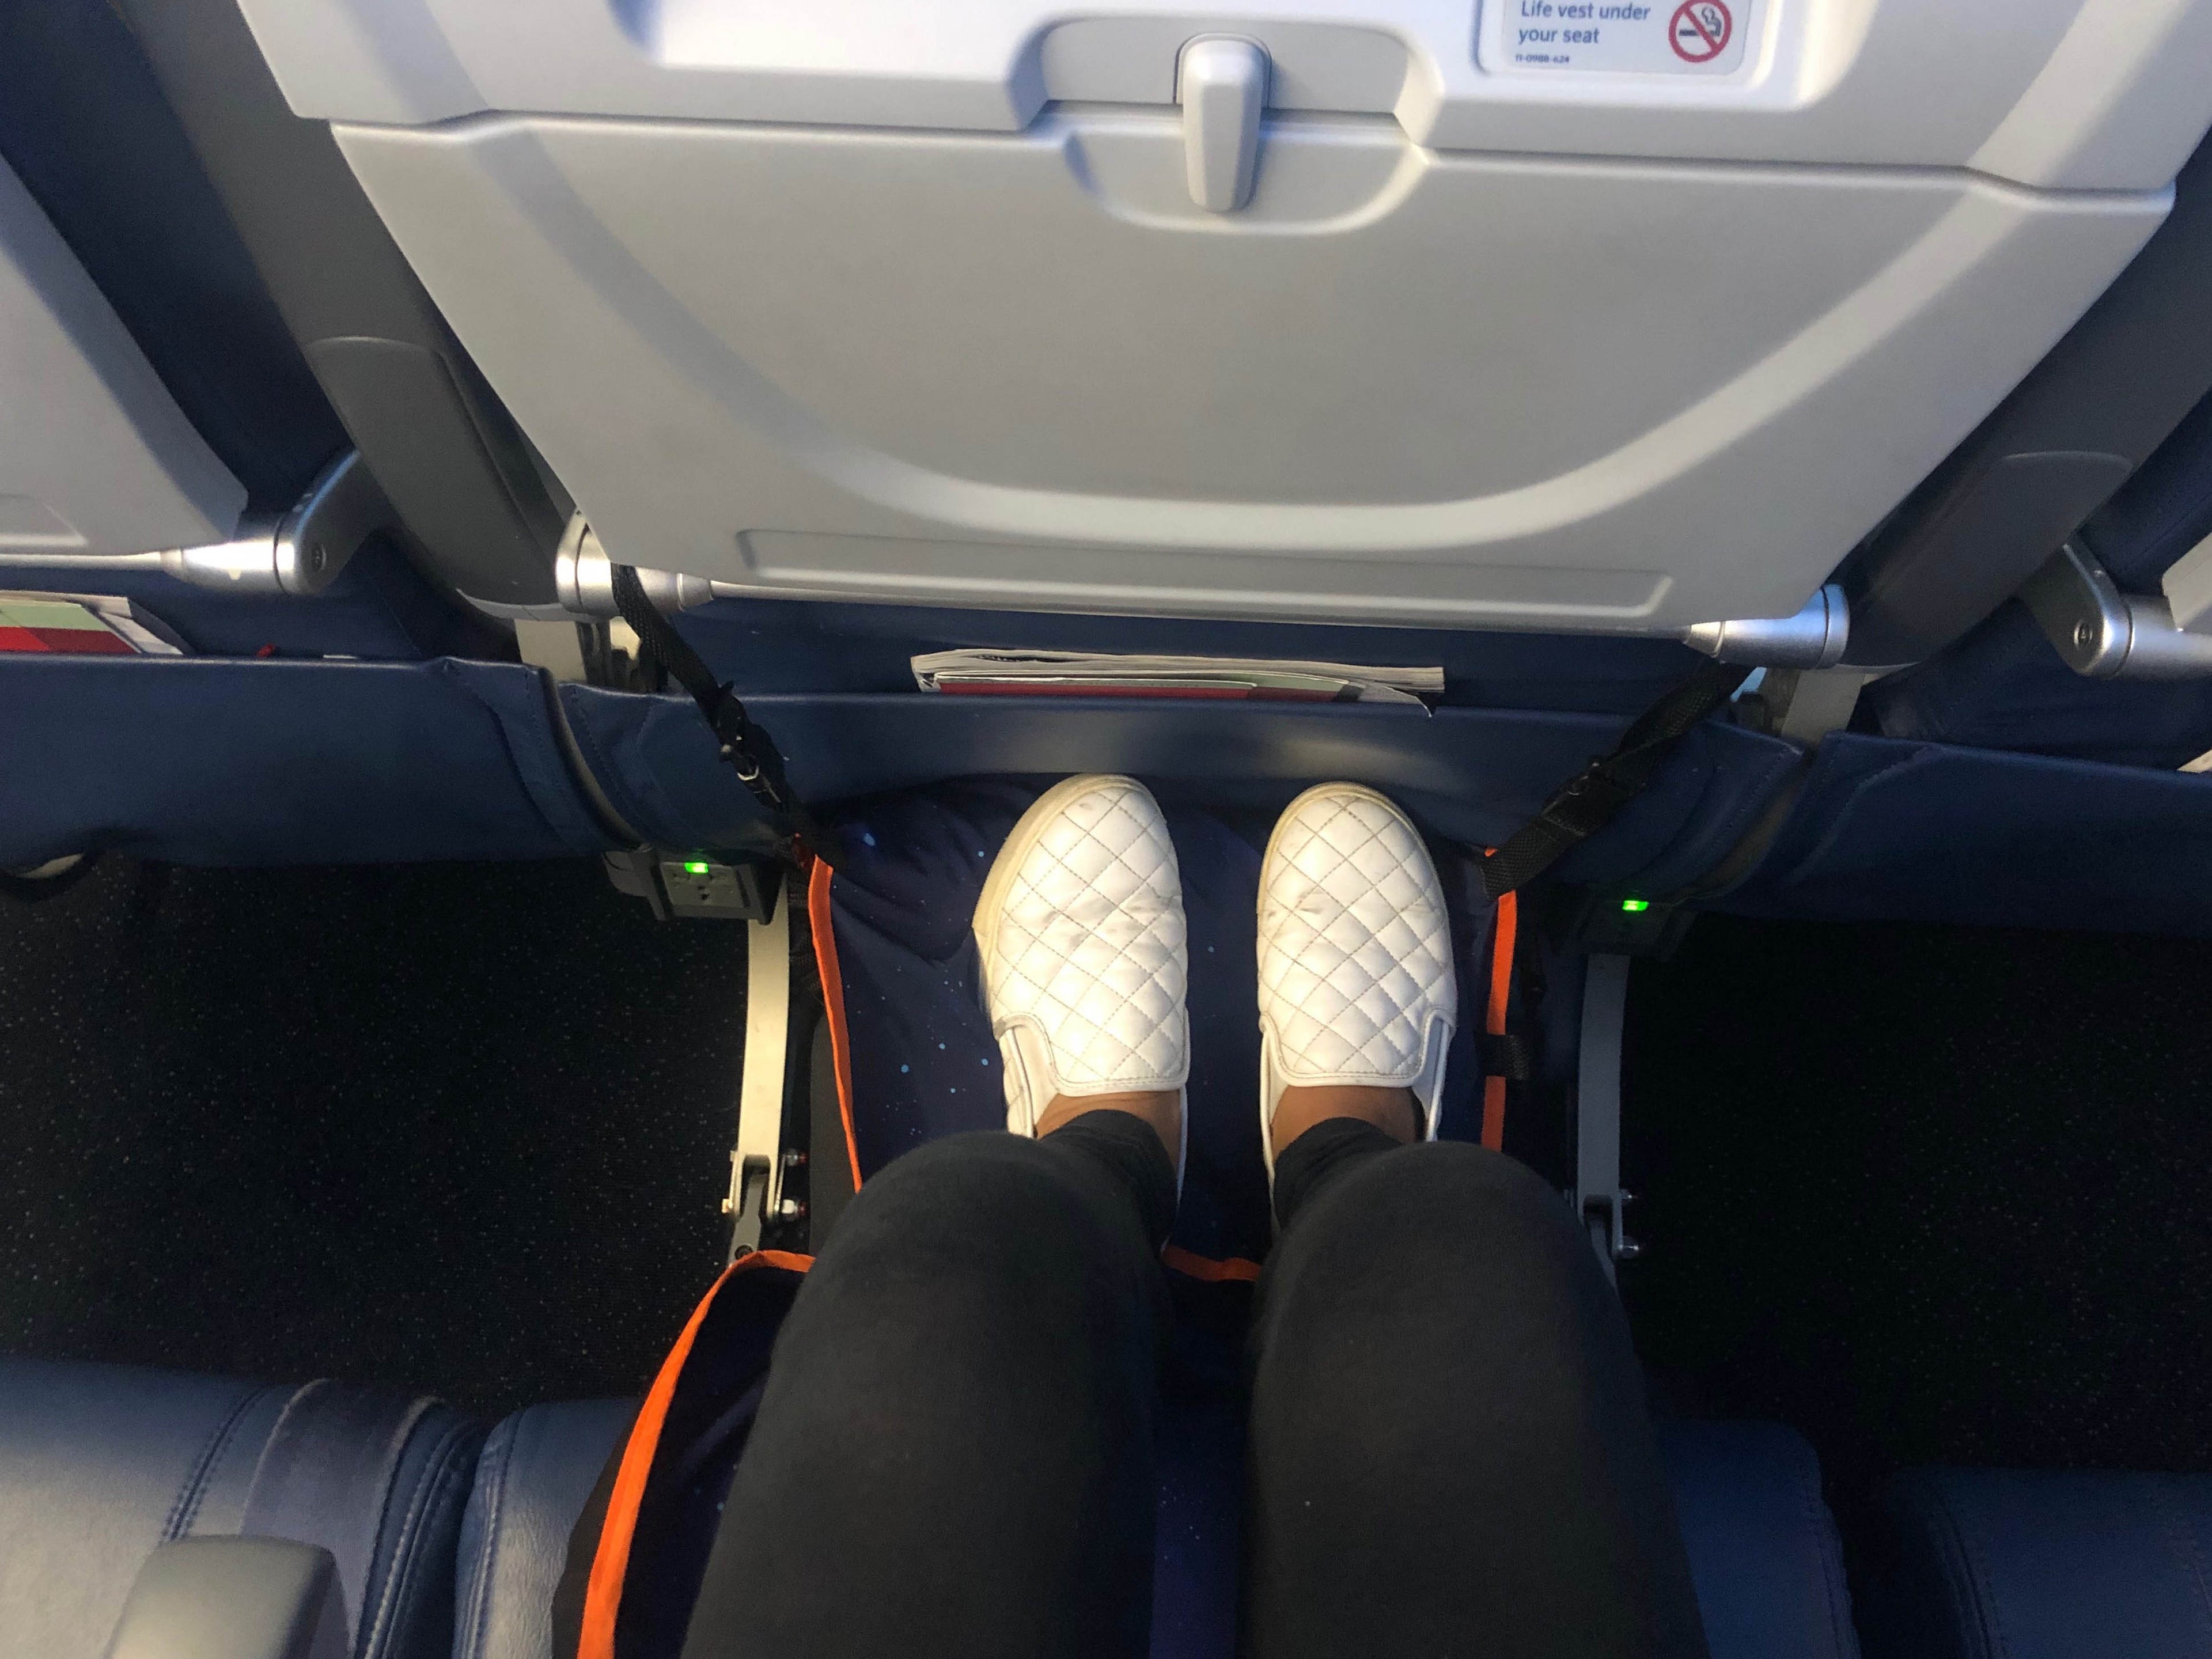 best inflatable travel footrest